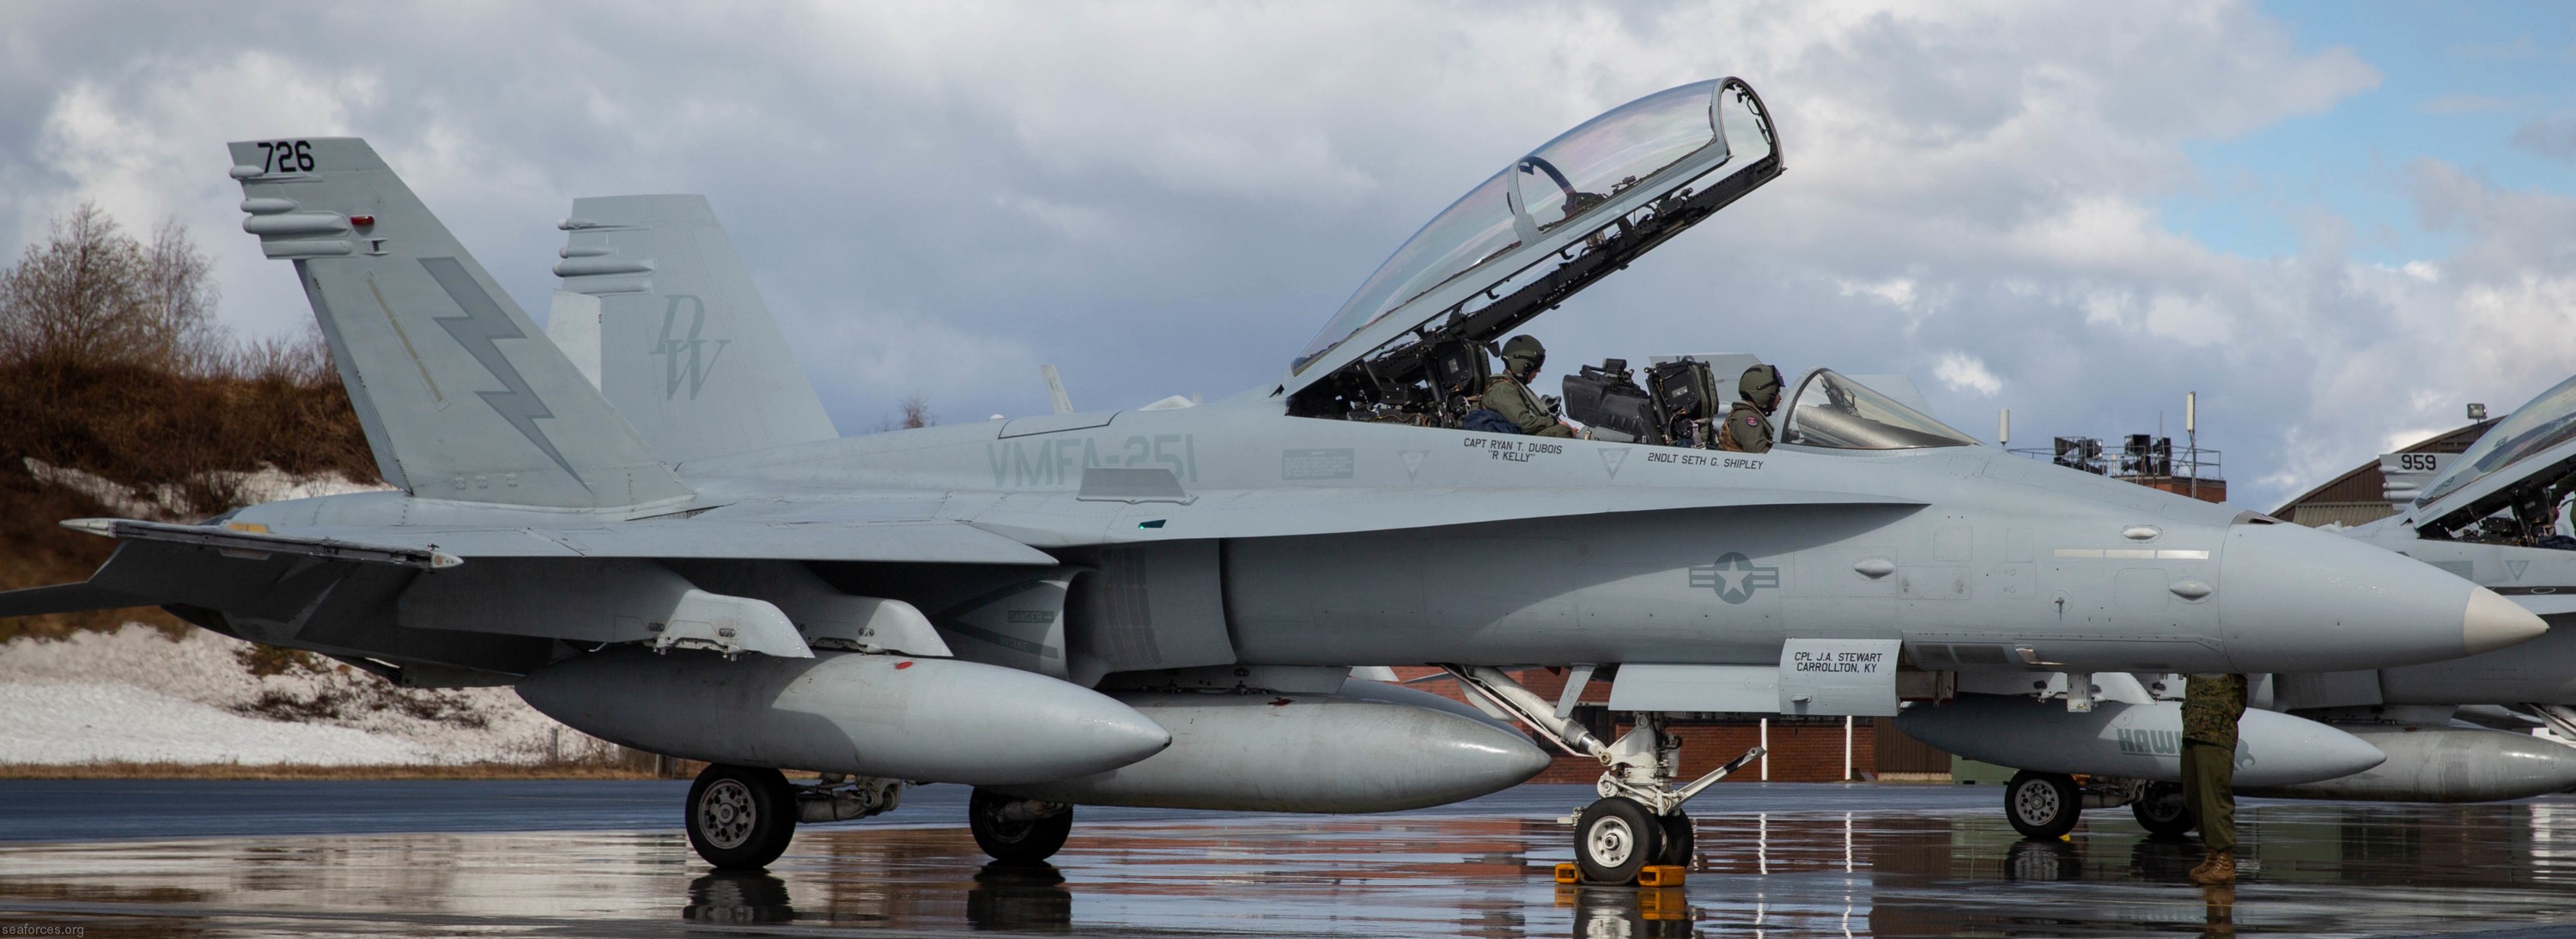 vmfa-251 thunderbolts marine fighter attack squadron f/a-18d hornet 90 exercise bold quest 2019 finland